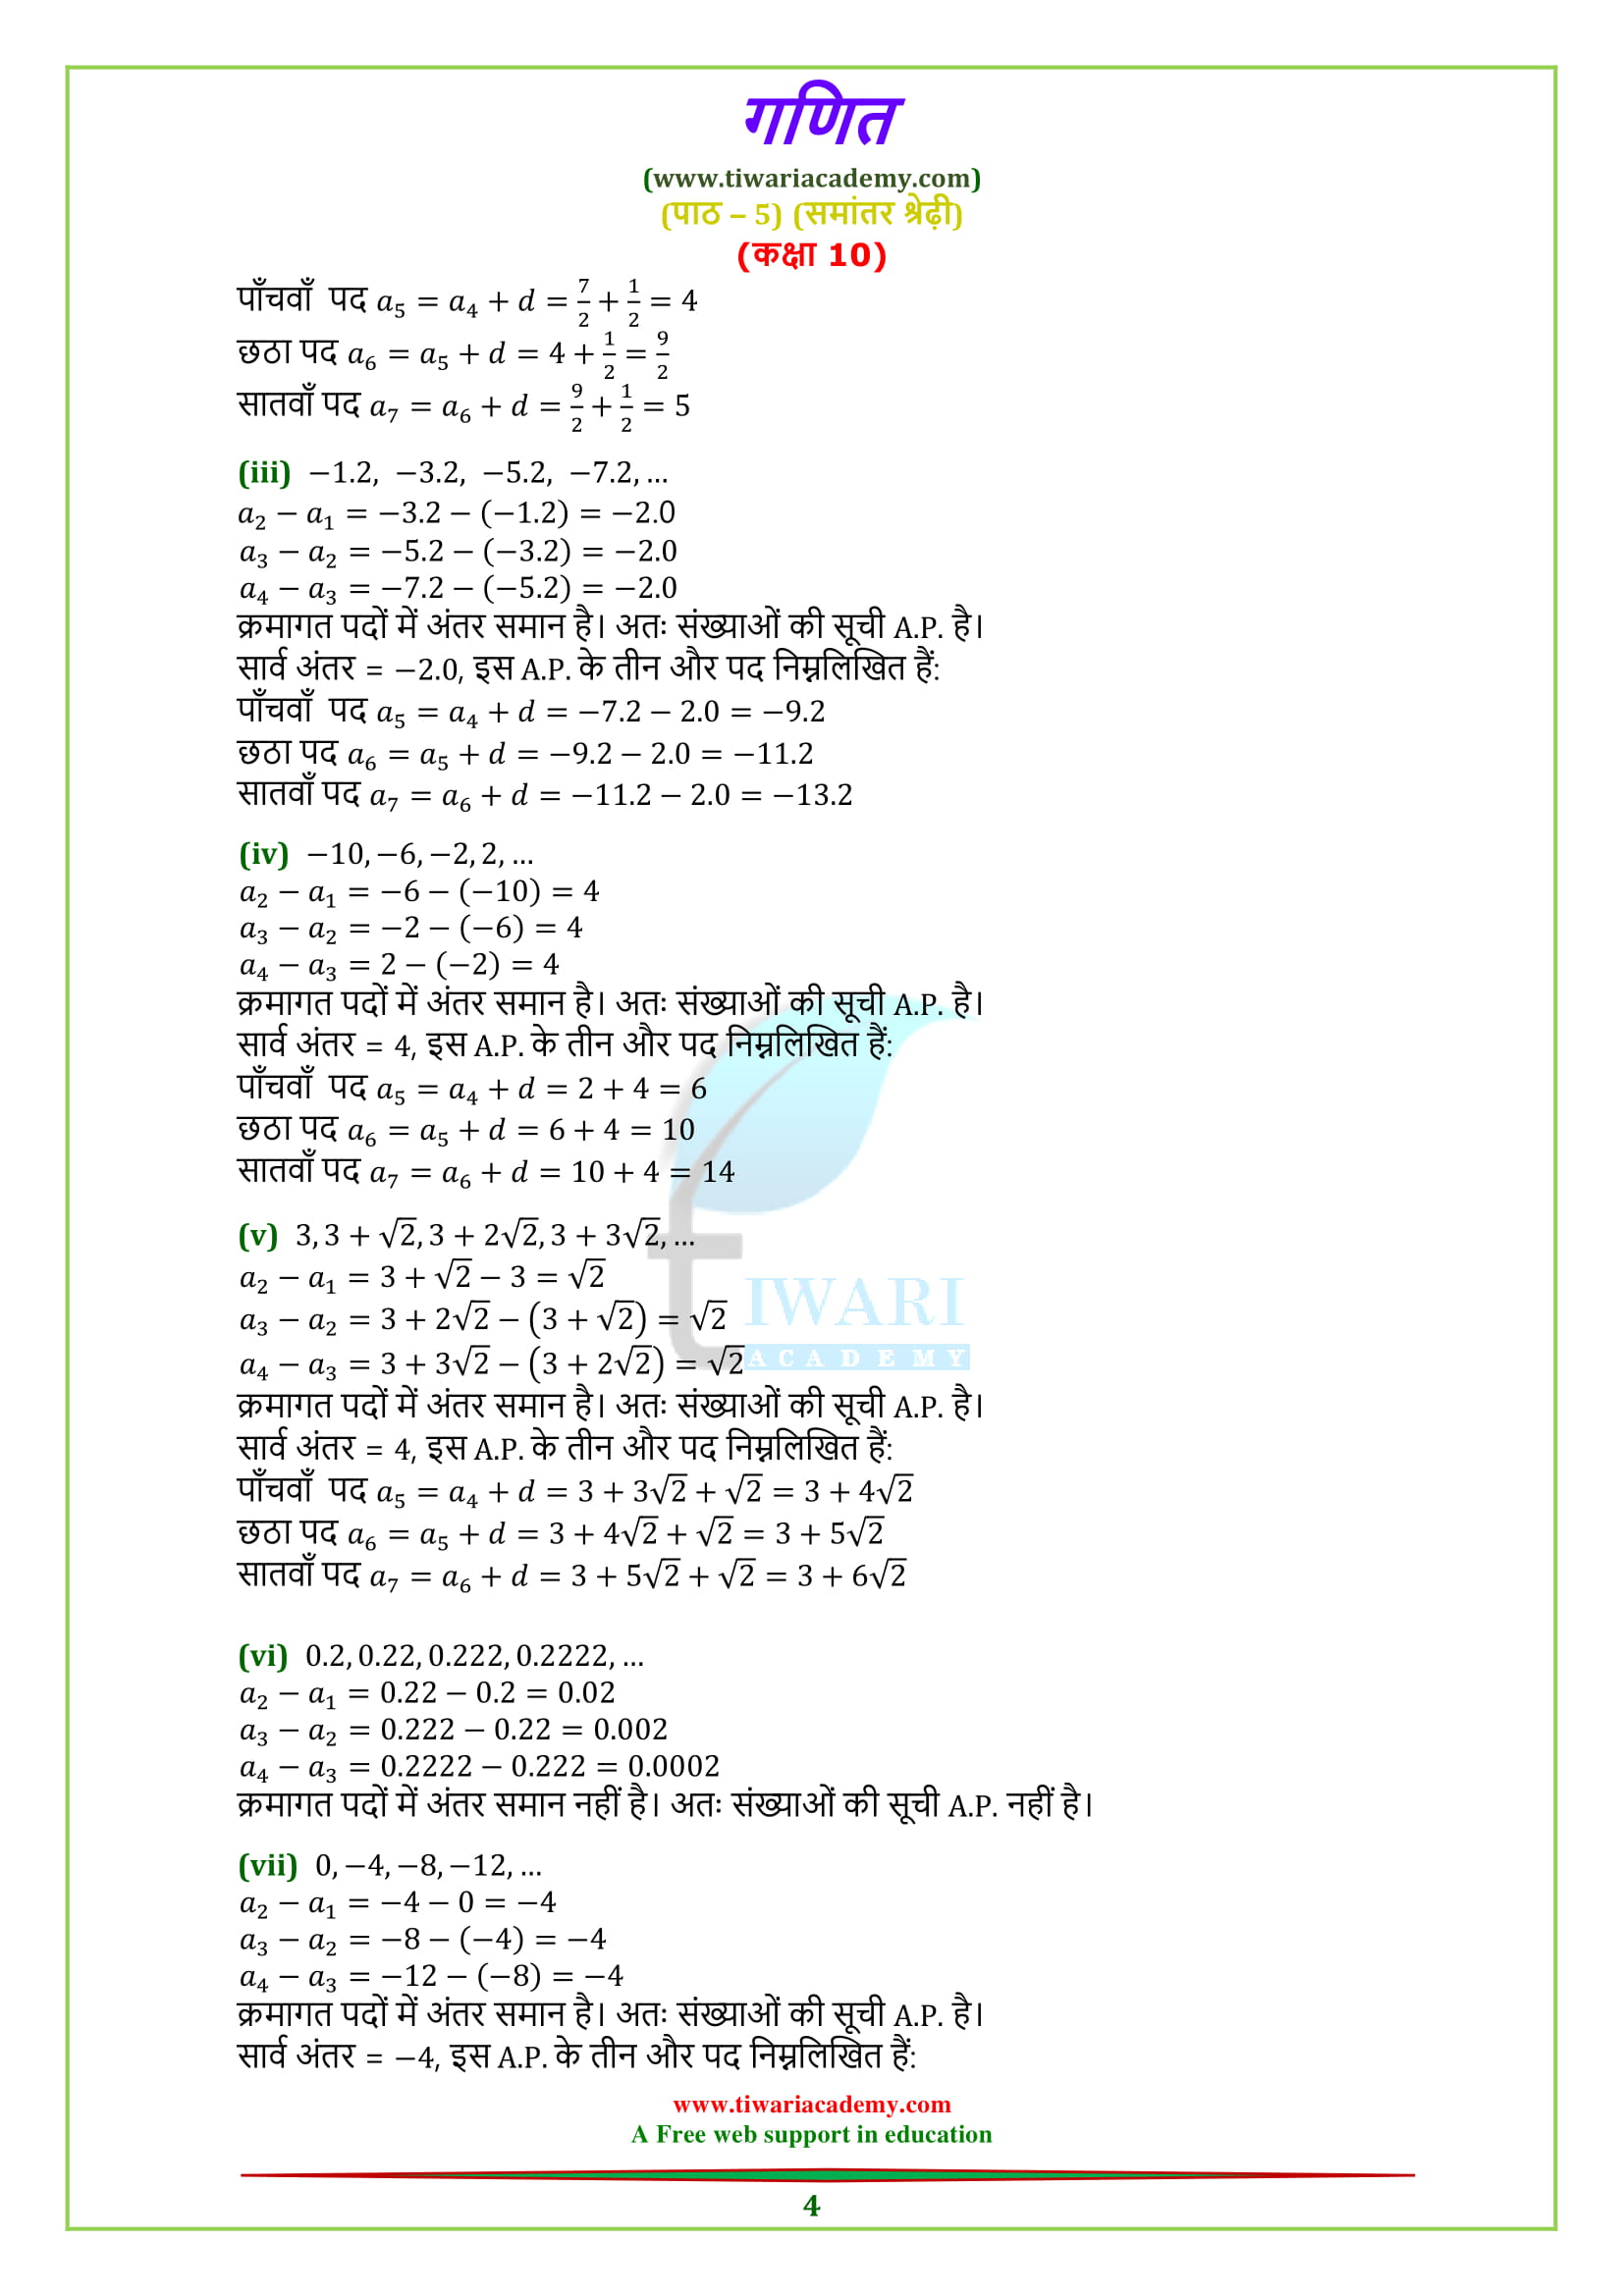 Class 10 Maths Chapter 5 Exercise 5.1 Solutions in Hindi